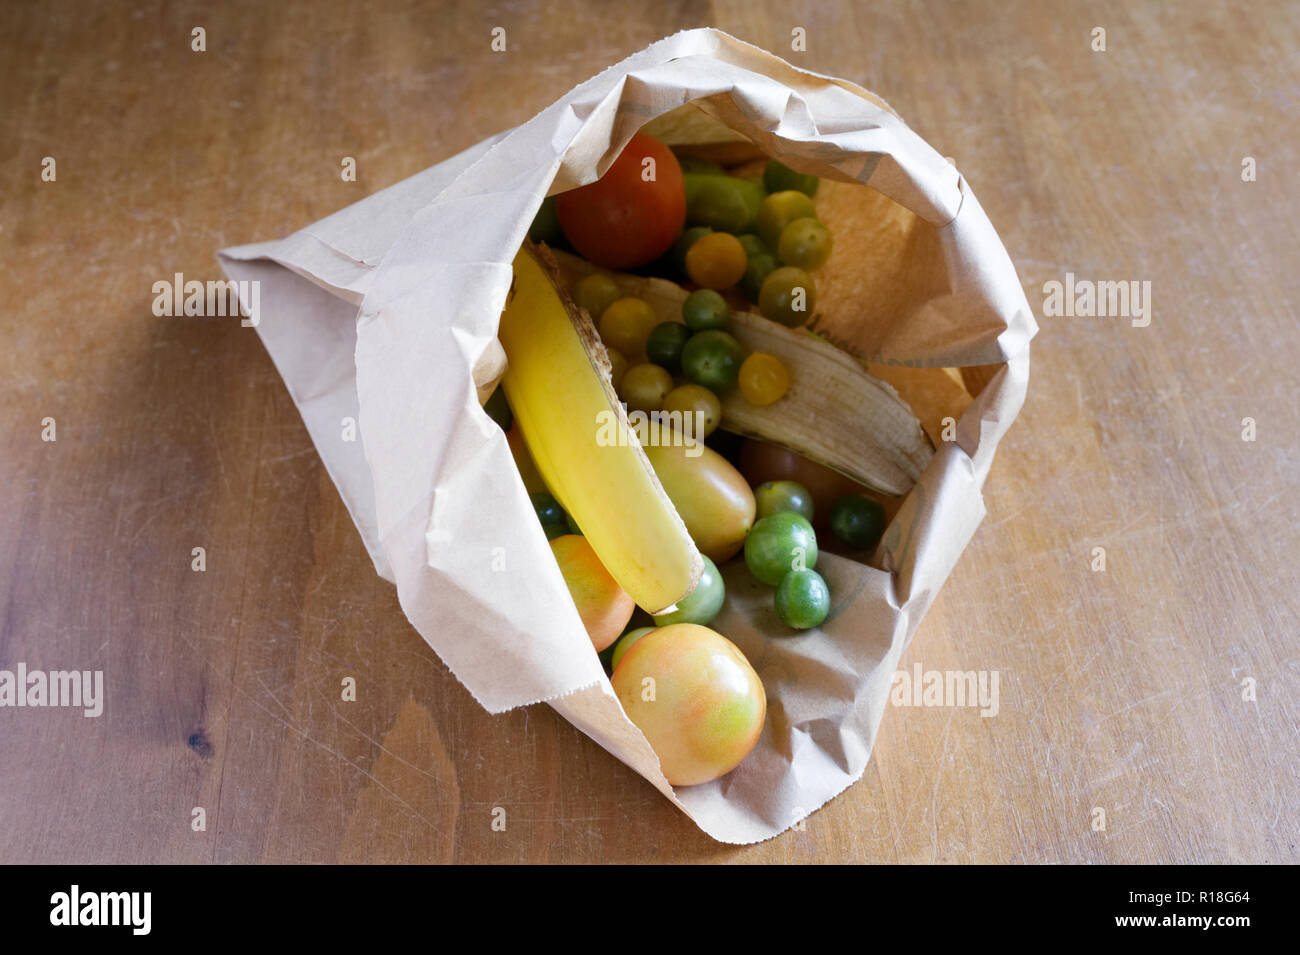 Ripening green tomatoes in a brown paper bag, with banana skins. Stock Photo